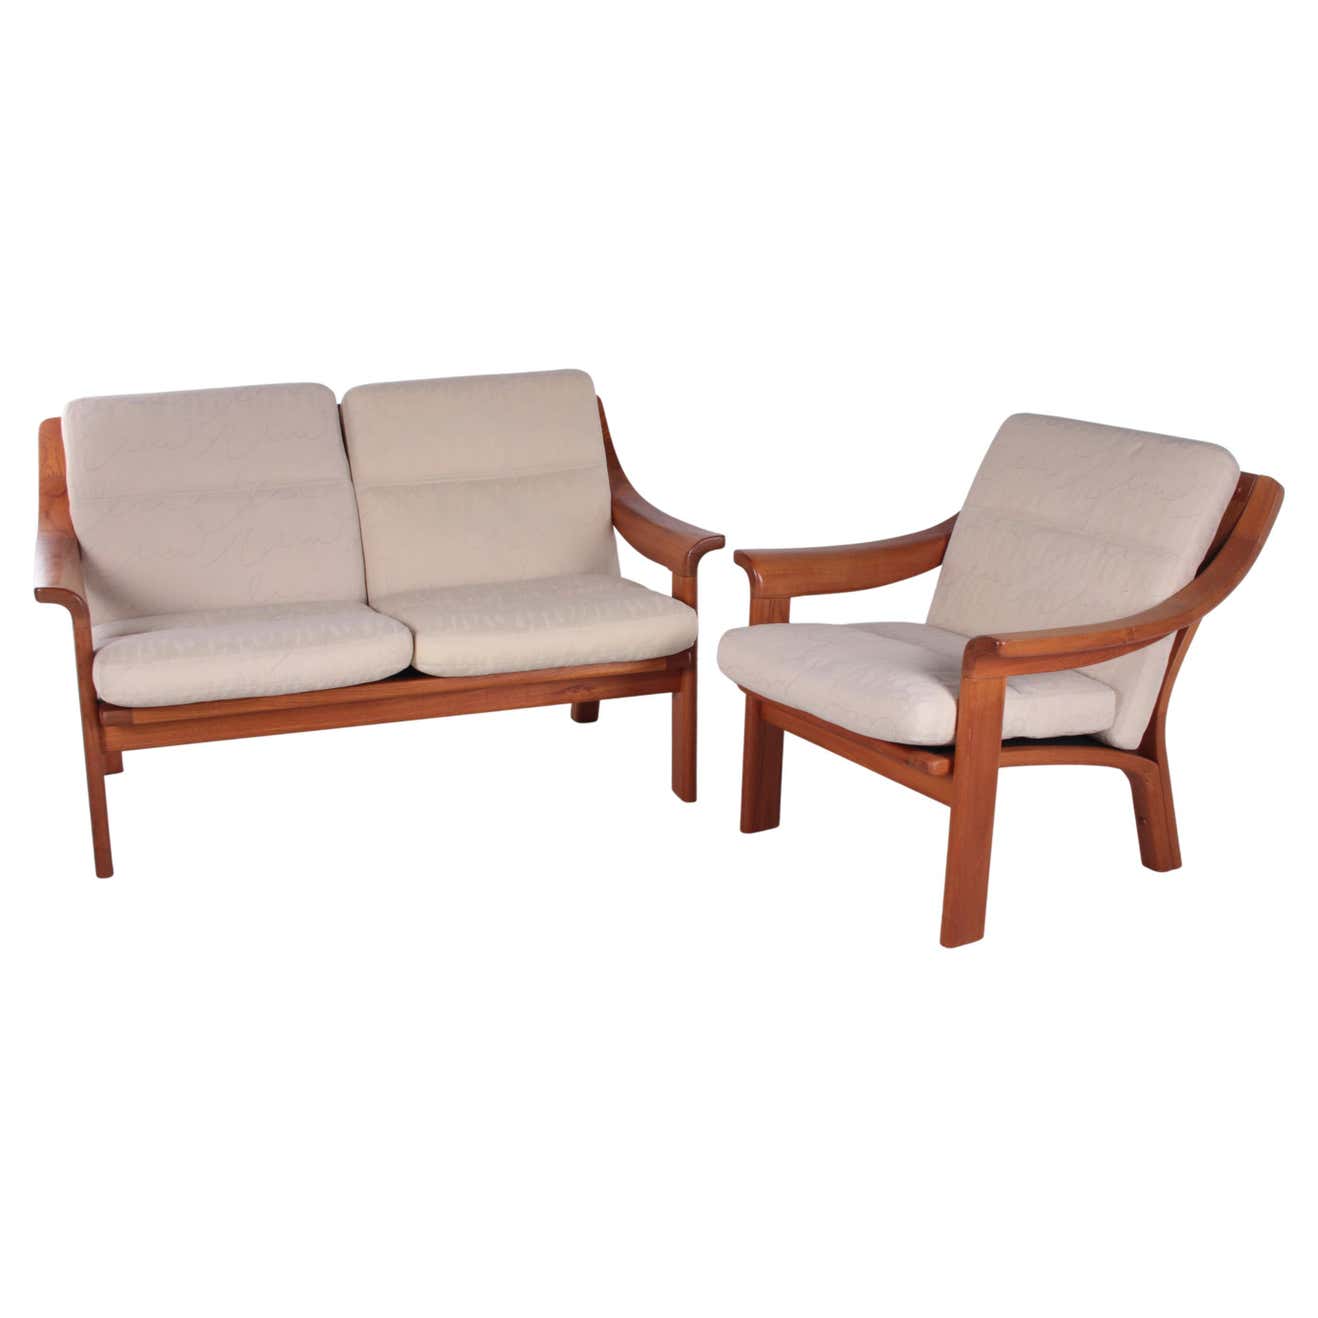 Vintage Danish Design Sofa and Armchair, 1960s For Sale at 1stDibs